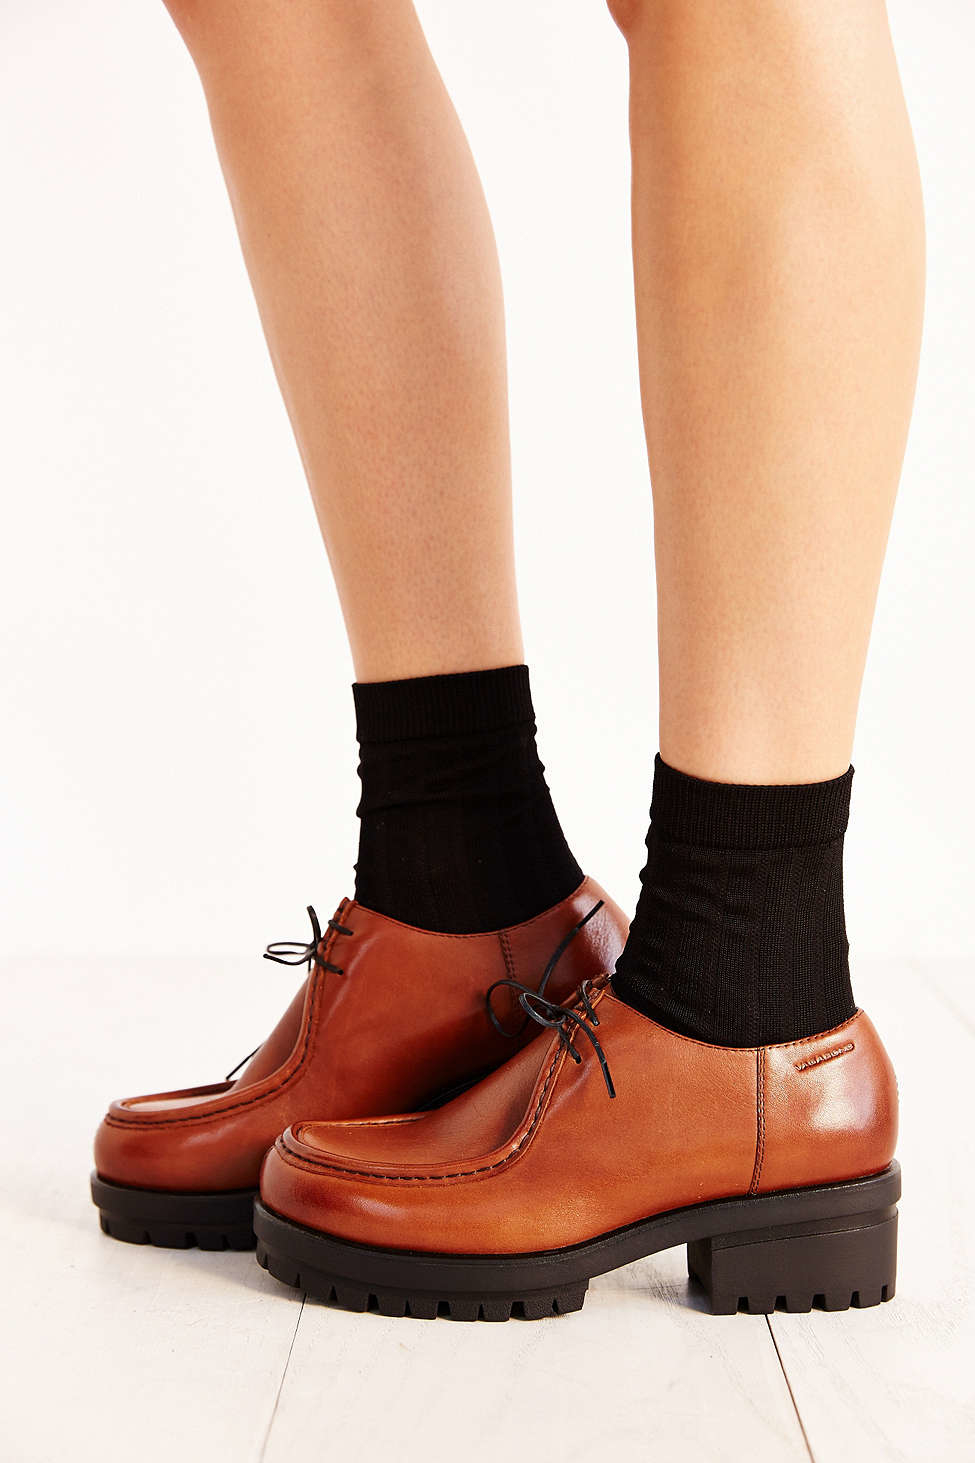 Vagabond Kayla Leather Oxford in Brown - Lyst